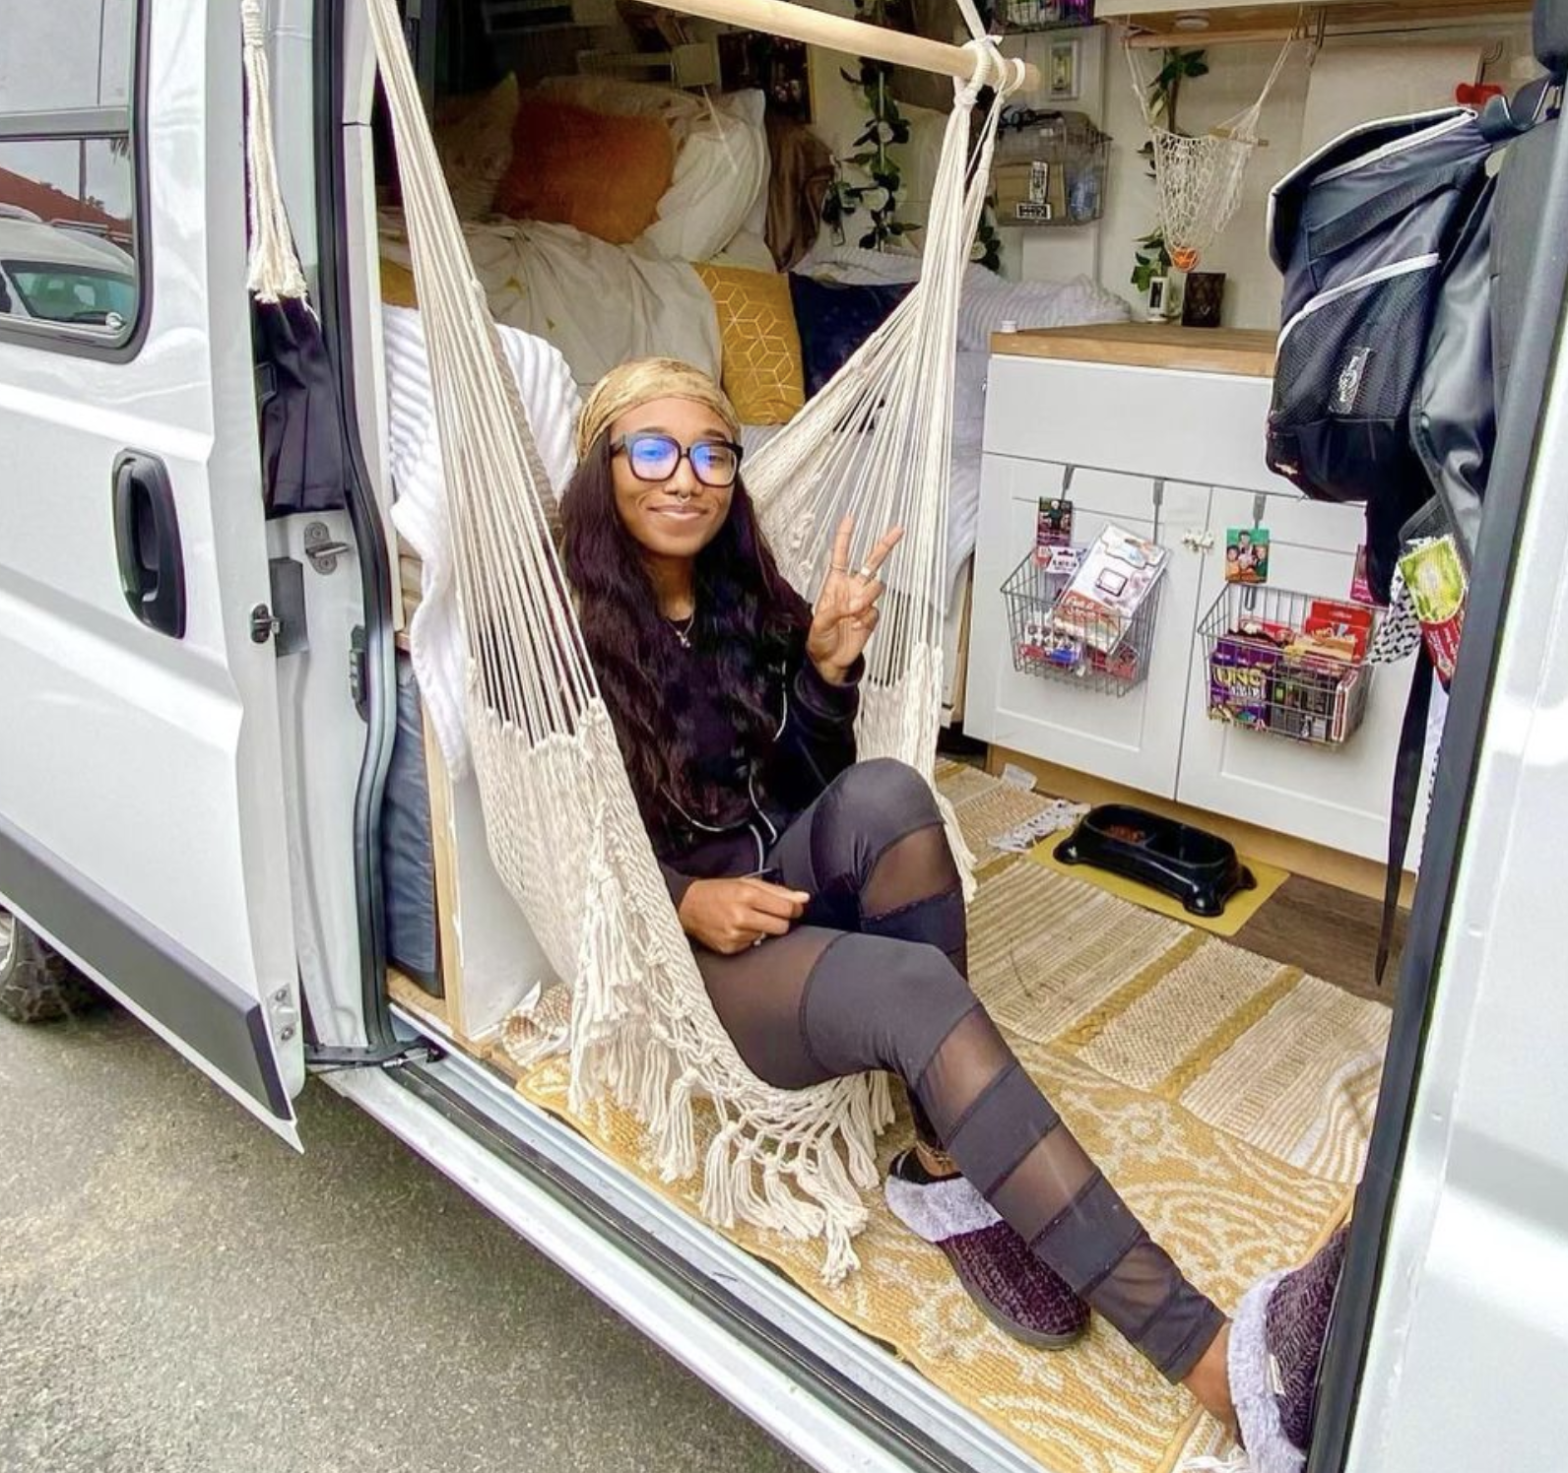 Meet Jasmine Wilson: The Woman Making $300K A Year While Living In A Van